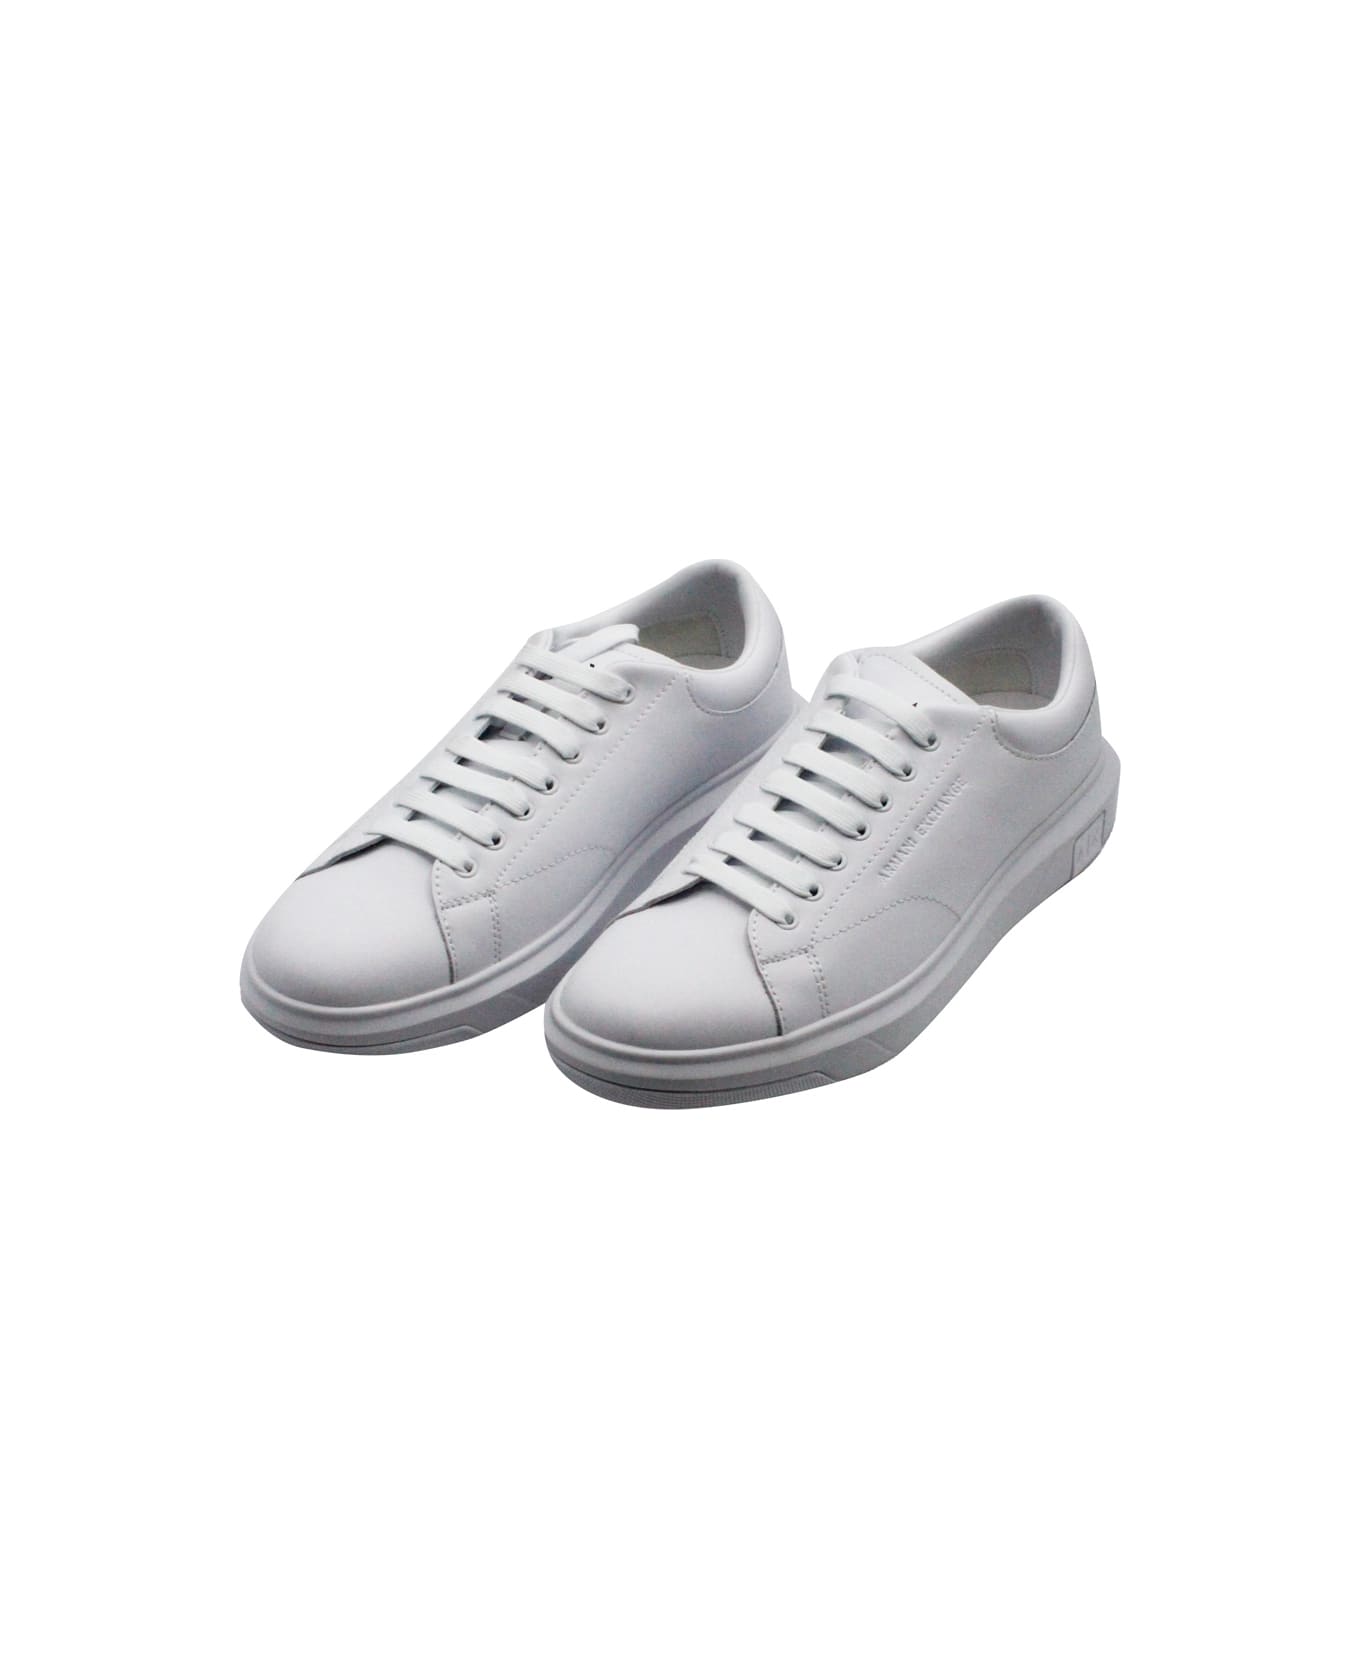 Armani Collezioni Leather Sneakers With Matching Box Sole And Lace Closure. Small Logo On The Tongue And Back - White